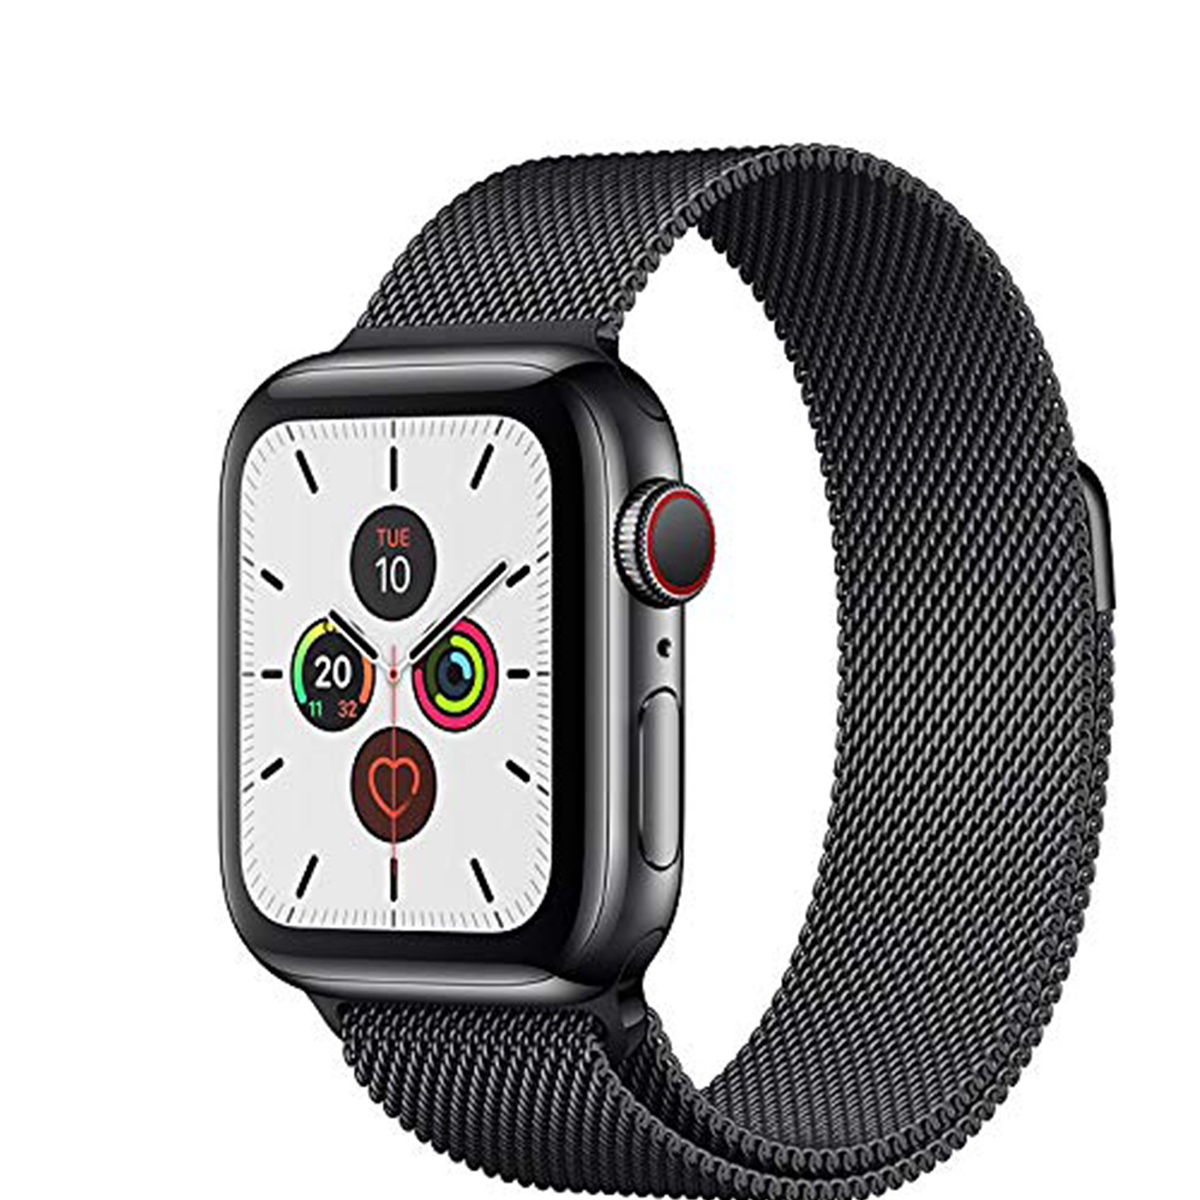 Apple Watch Series 5 GPS + Cellular MWX92AE/A 40mm Space Black Stainless Steel Case with Space Black Milanese Loop